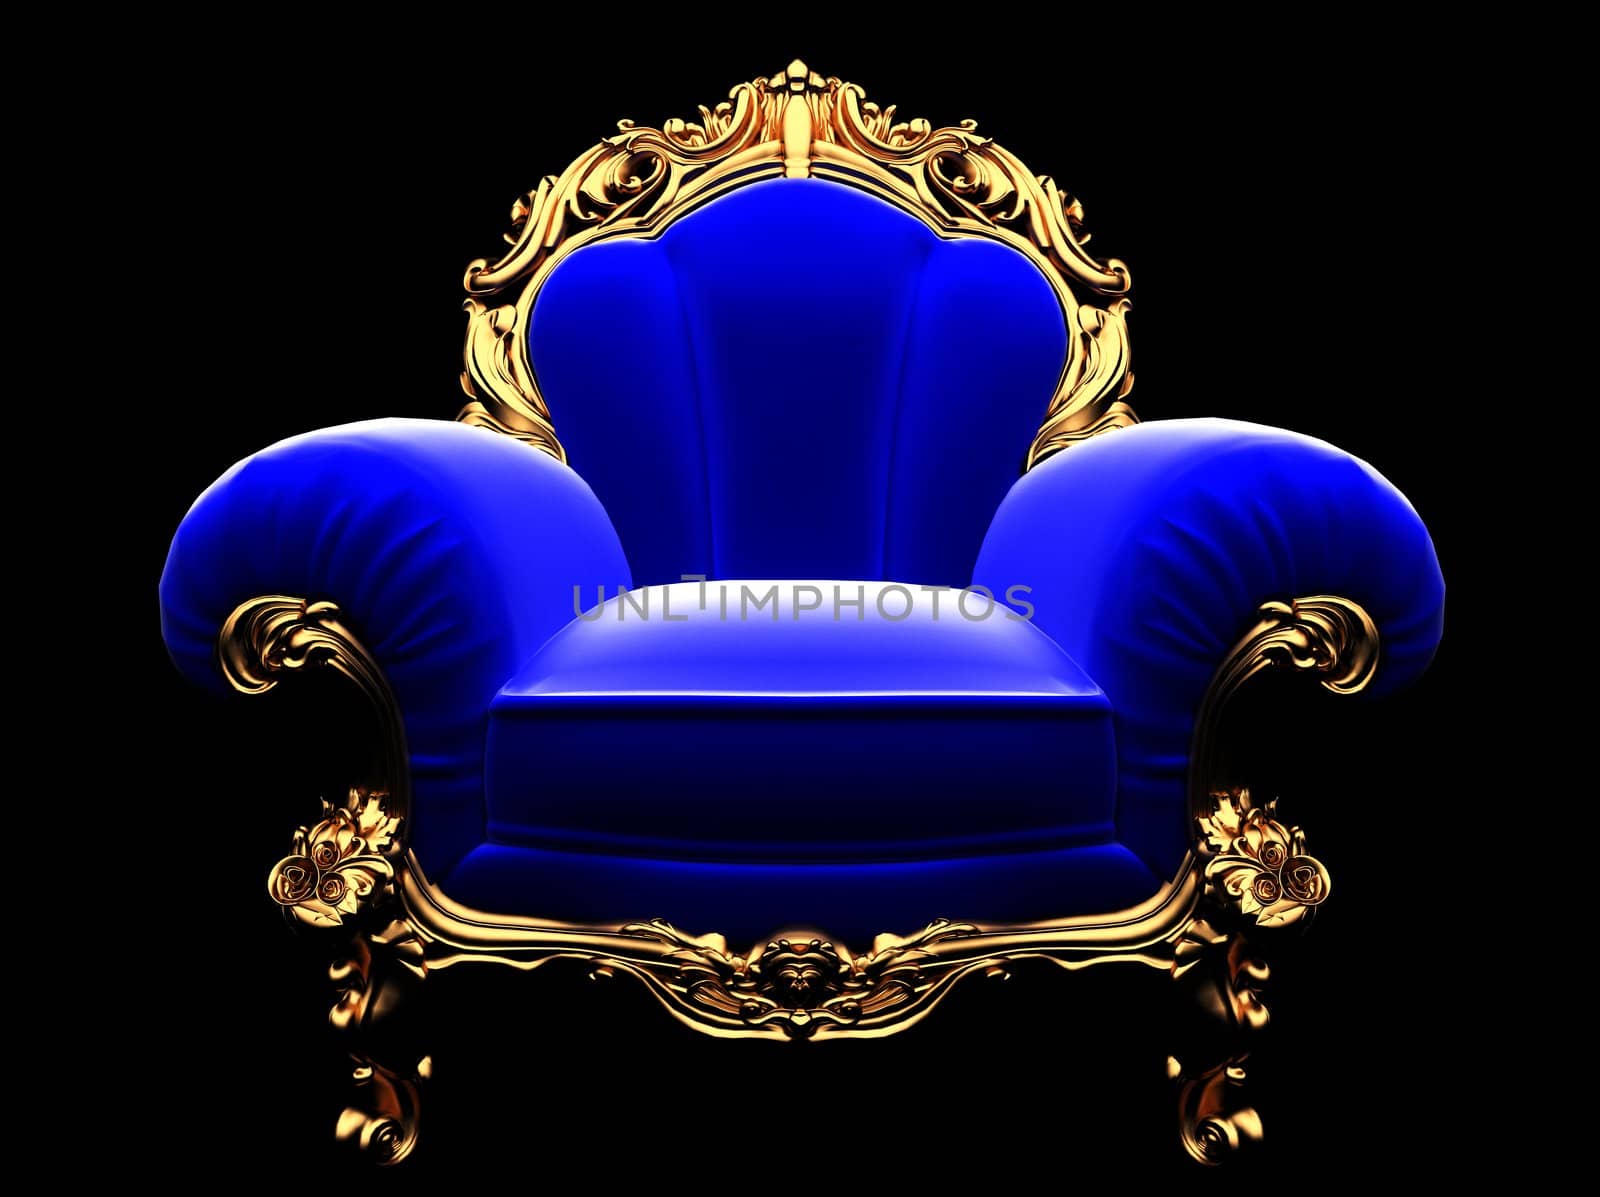 classic golden chair in the dark made in 3D